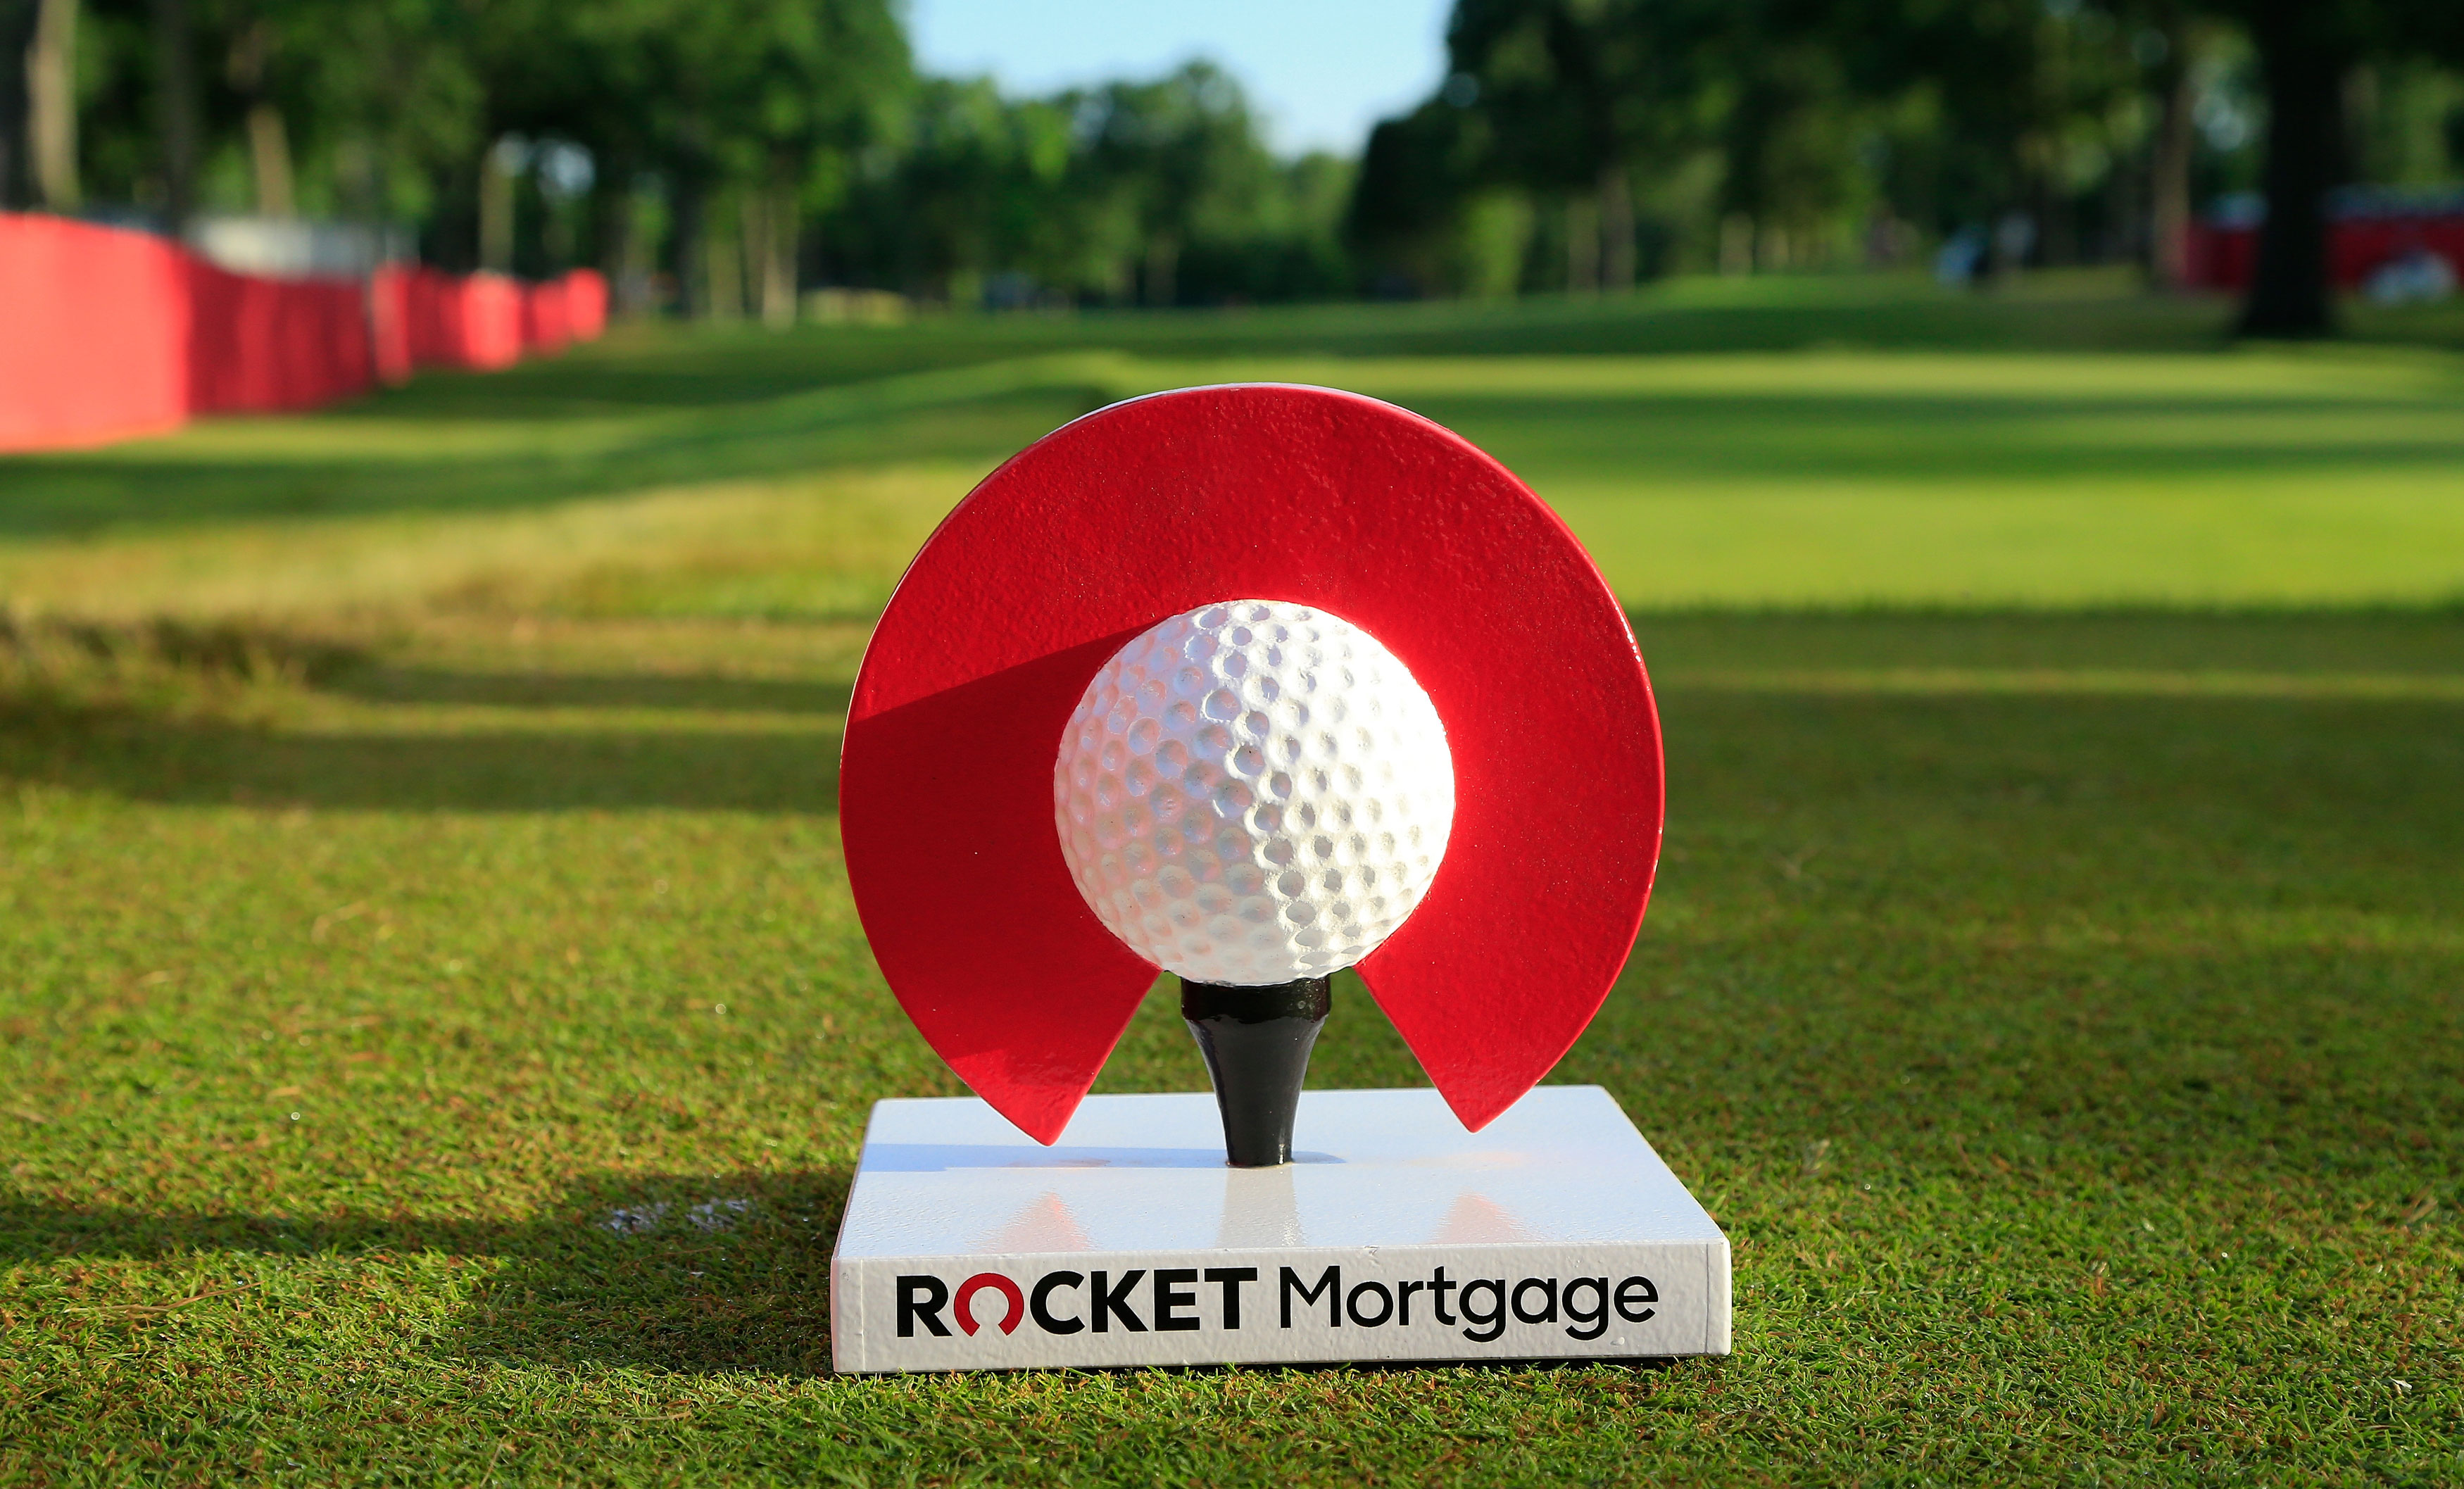 Heres the prize money payout for each golfer at the 2021 Rocket Mortgage Classic Golf News and Tour Information GolfDigest